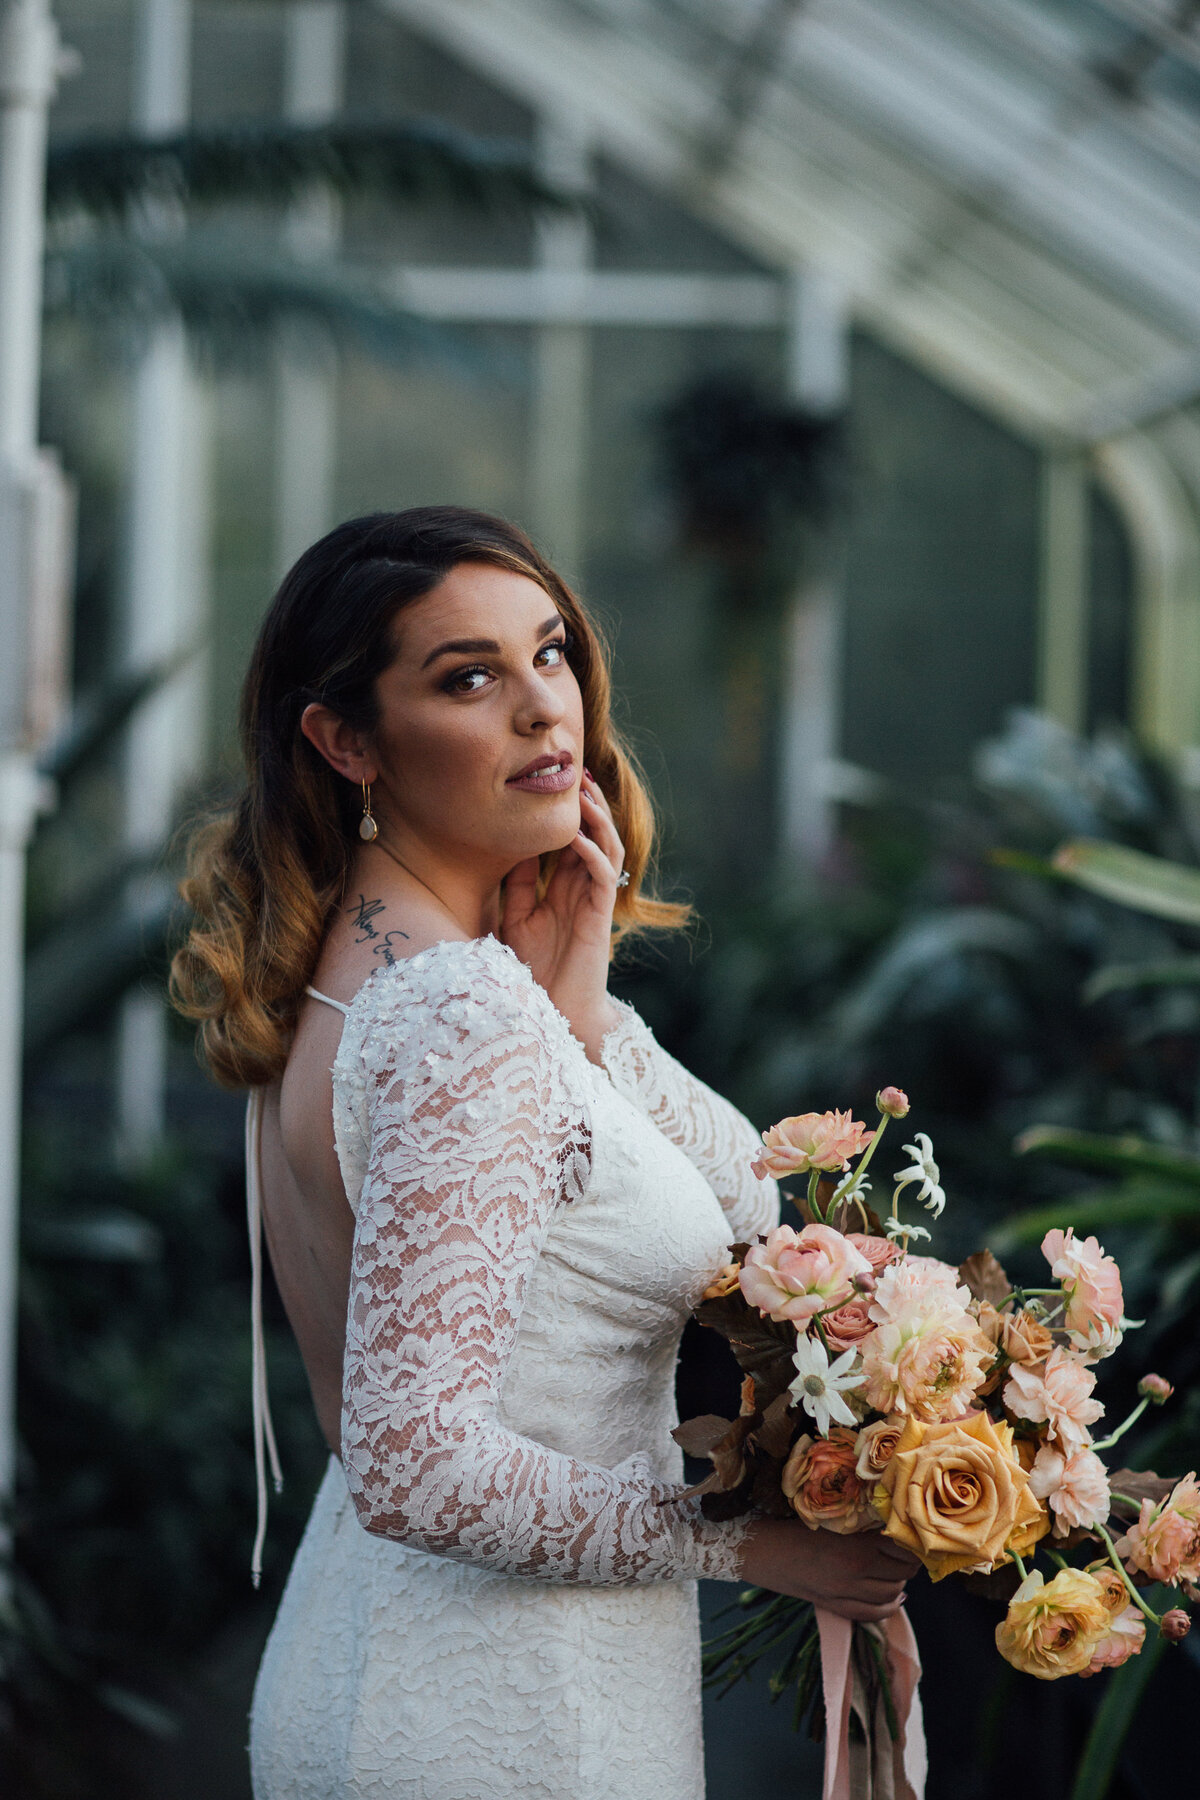 This all-lace wedding dress has a crepe underlayer except for under the long sleeves which are sheer. The shoulders of the sleeves are adorned with small 3D flowers and crystals and the cuff is finished with a lace scallop edge.